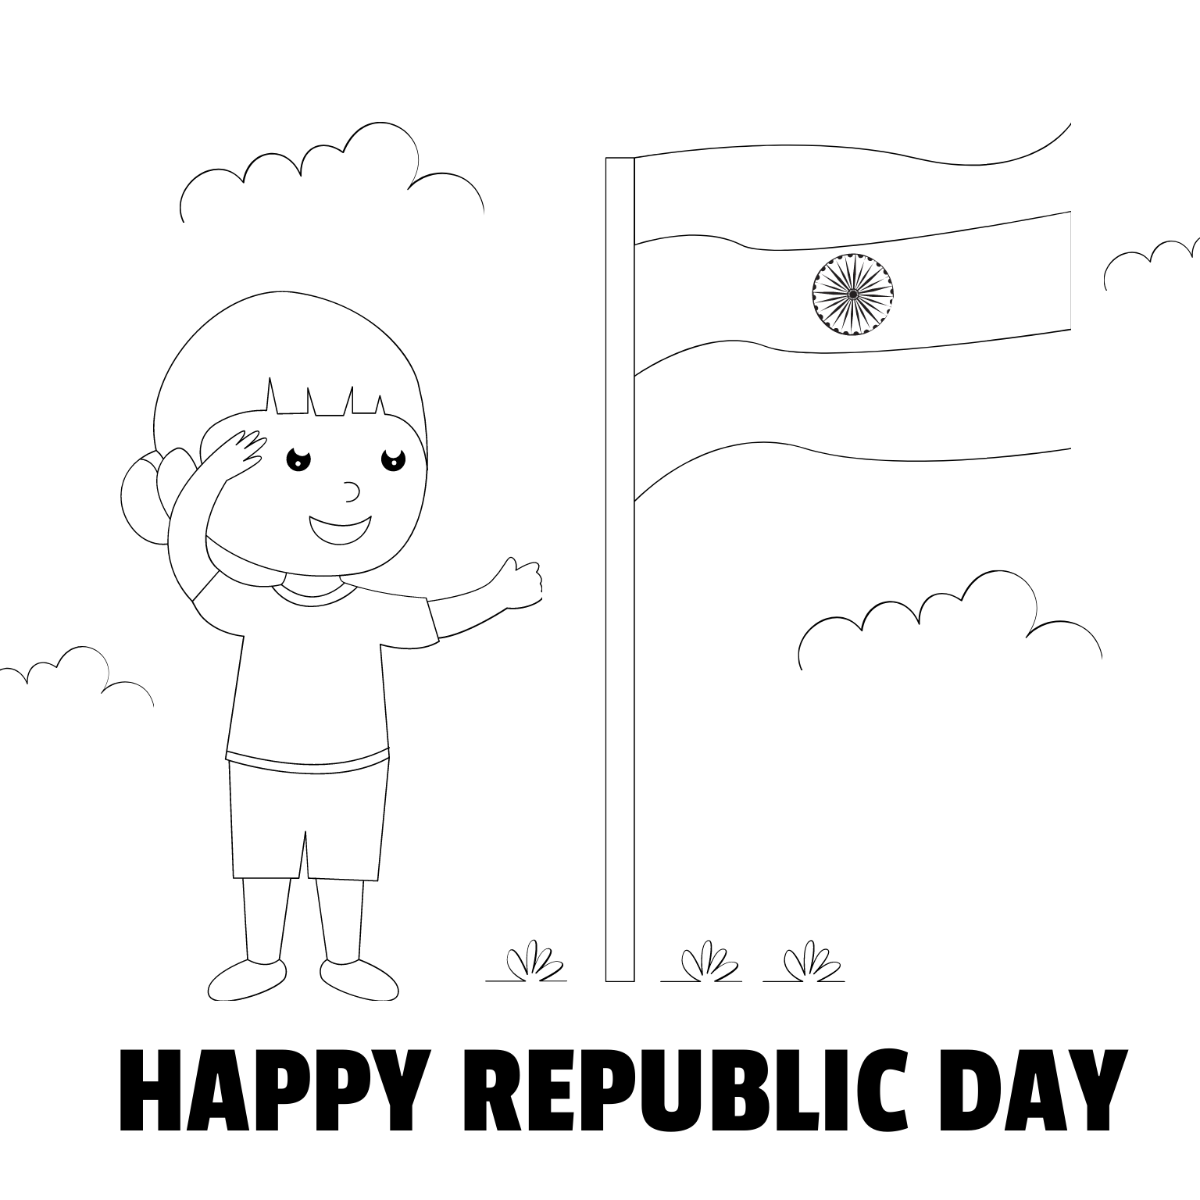 republic day drawing easy and beautiful - YouTube-saigonsouth.com.vn